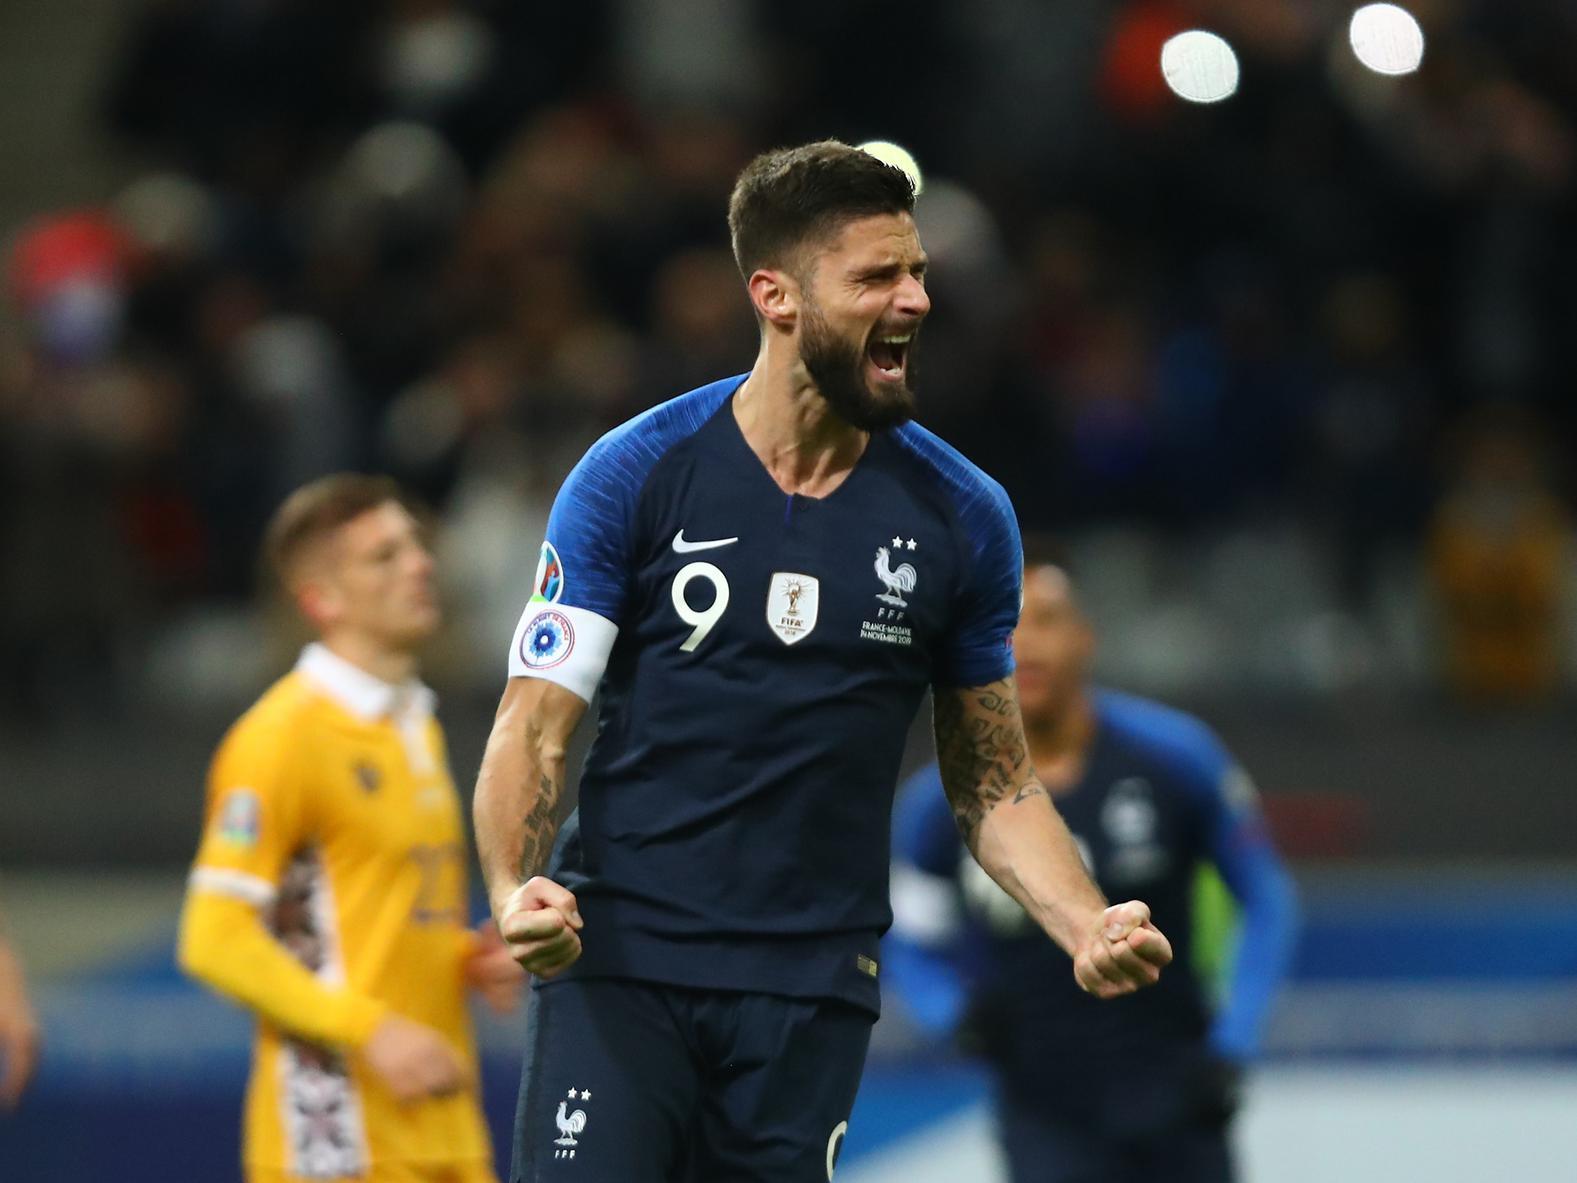 Newcastle want to sign Olivier Giroud on loan for the rest of the season but Chelsea have told them they will not let the striker leave unless they can bring in a replacement. (Telegraph)